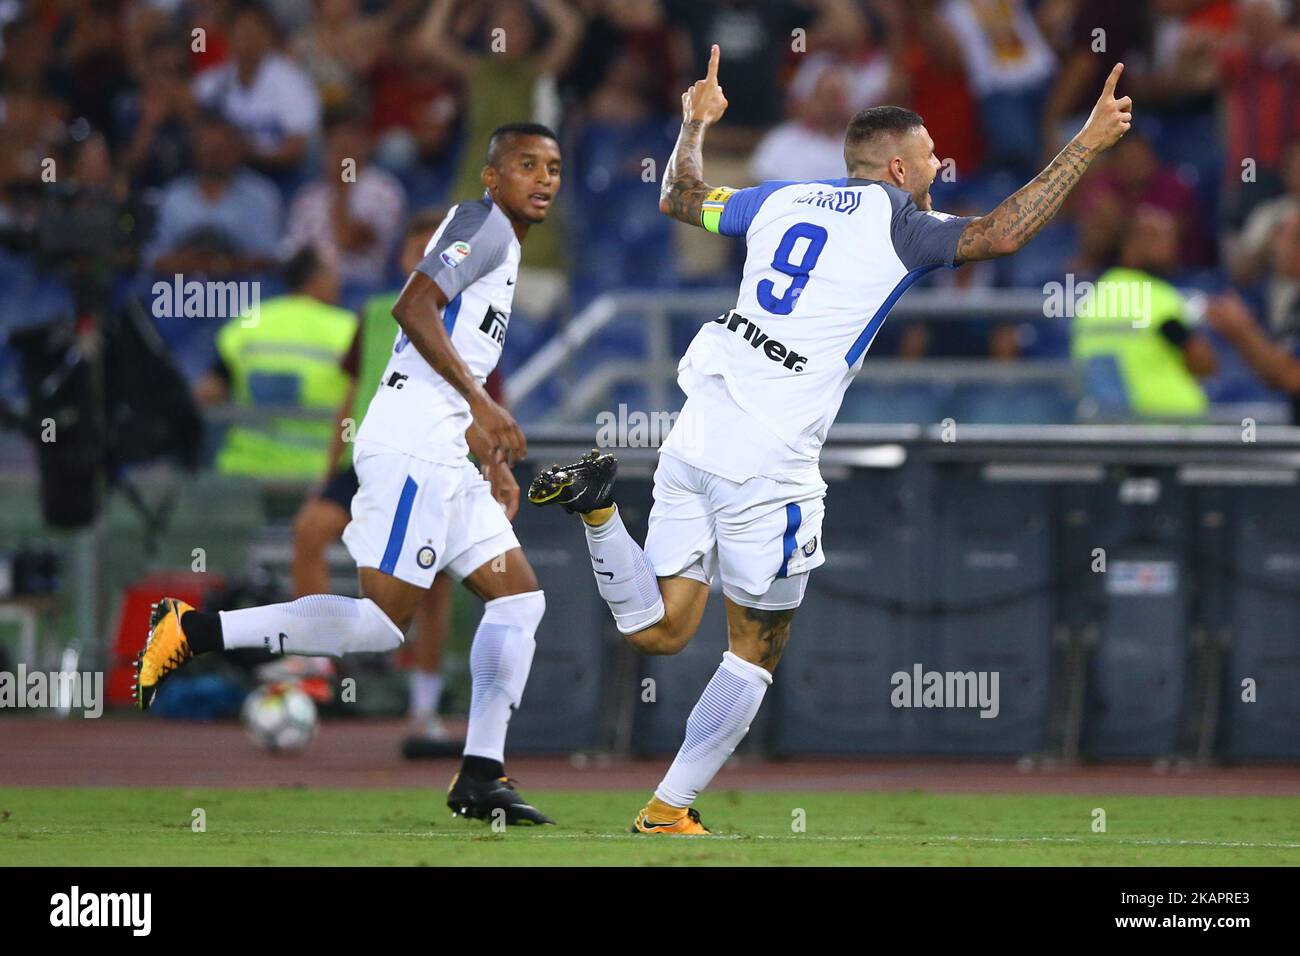 Mauro Icardi of Internazionale and Dalbert of Internazionale celebration after the goal of scoring the goal of 1-2 scored during the Serie A match between AS Roma and FC Internazionale at Olimpico Stadium in Rome, Italy, on August 26, 2017. (Photo by Matteo Ciambelli/NurPhoto)  Stock Photo